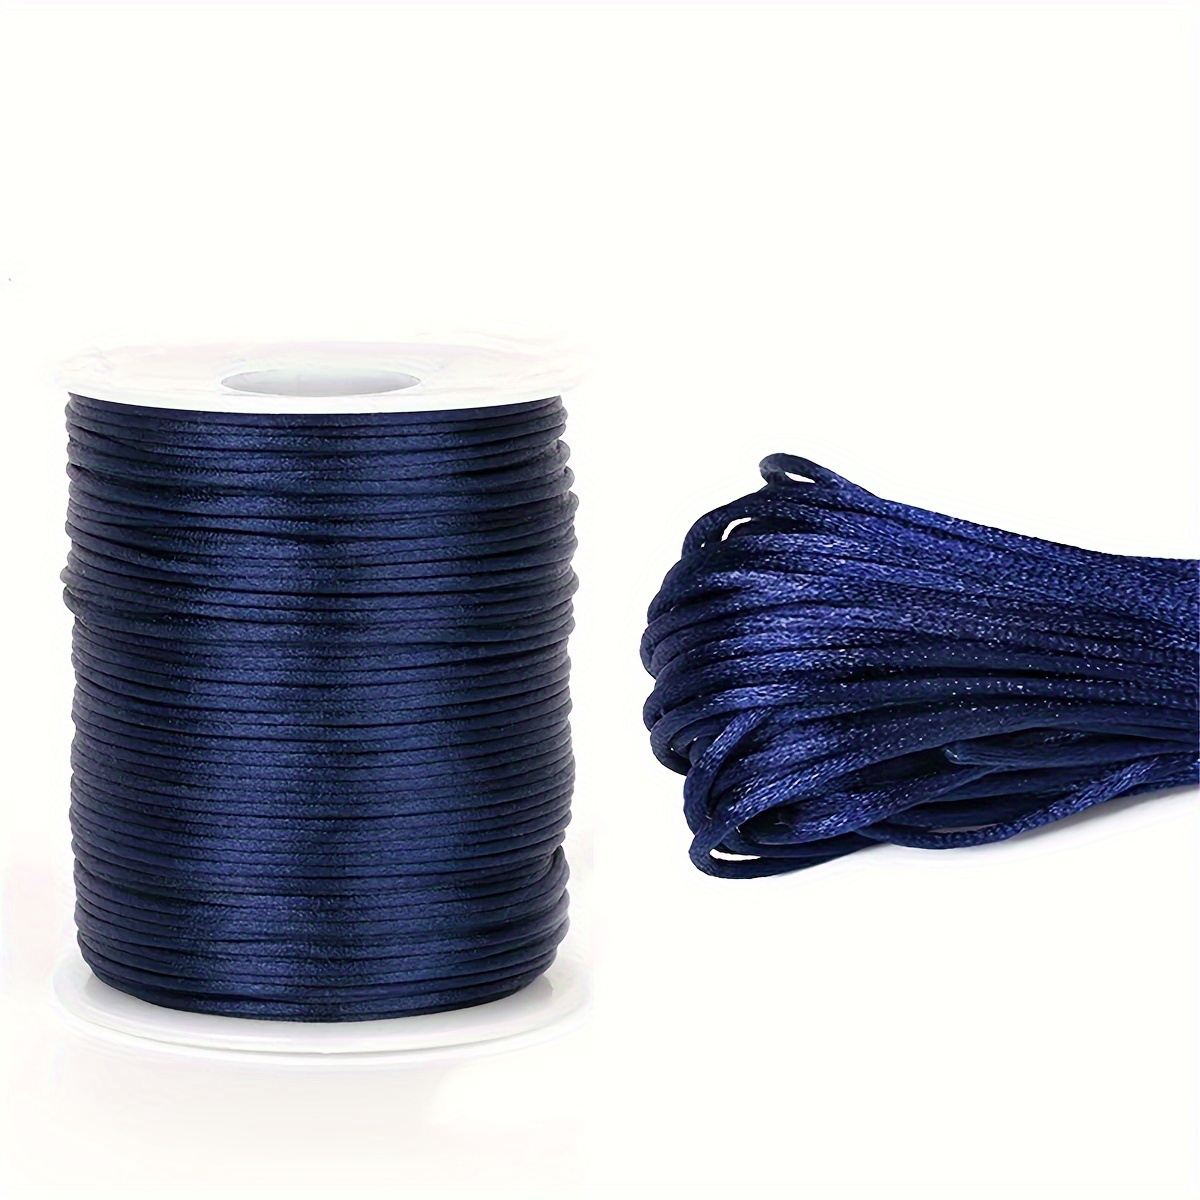 Hot Sale 10 Color Nylon Cord Thread Chinese Knot Macrame Rattail